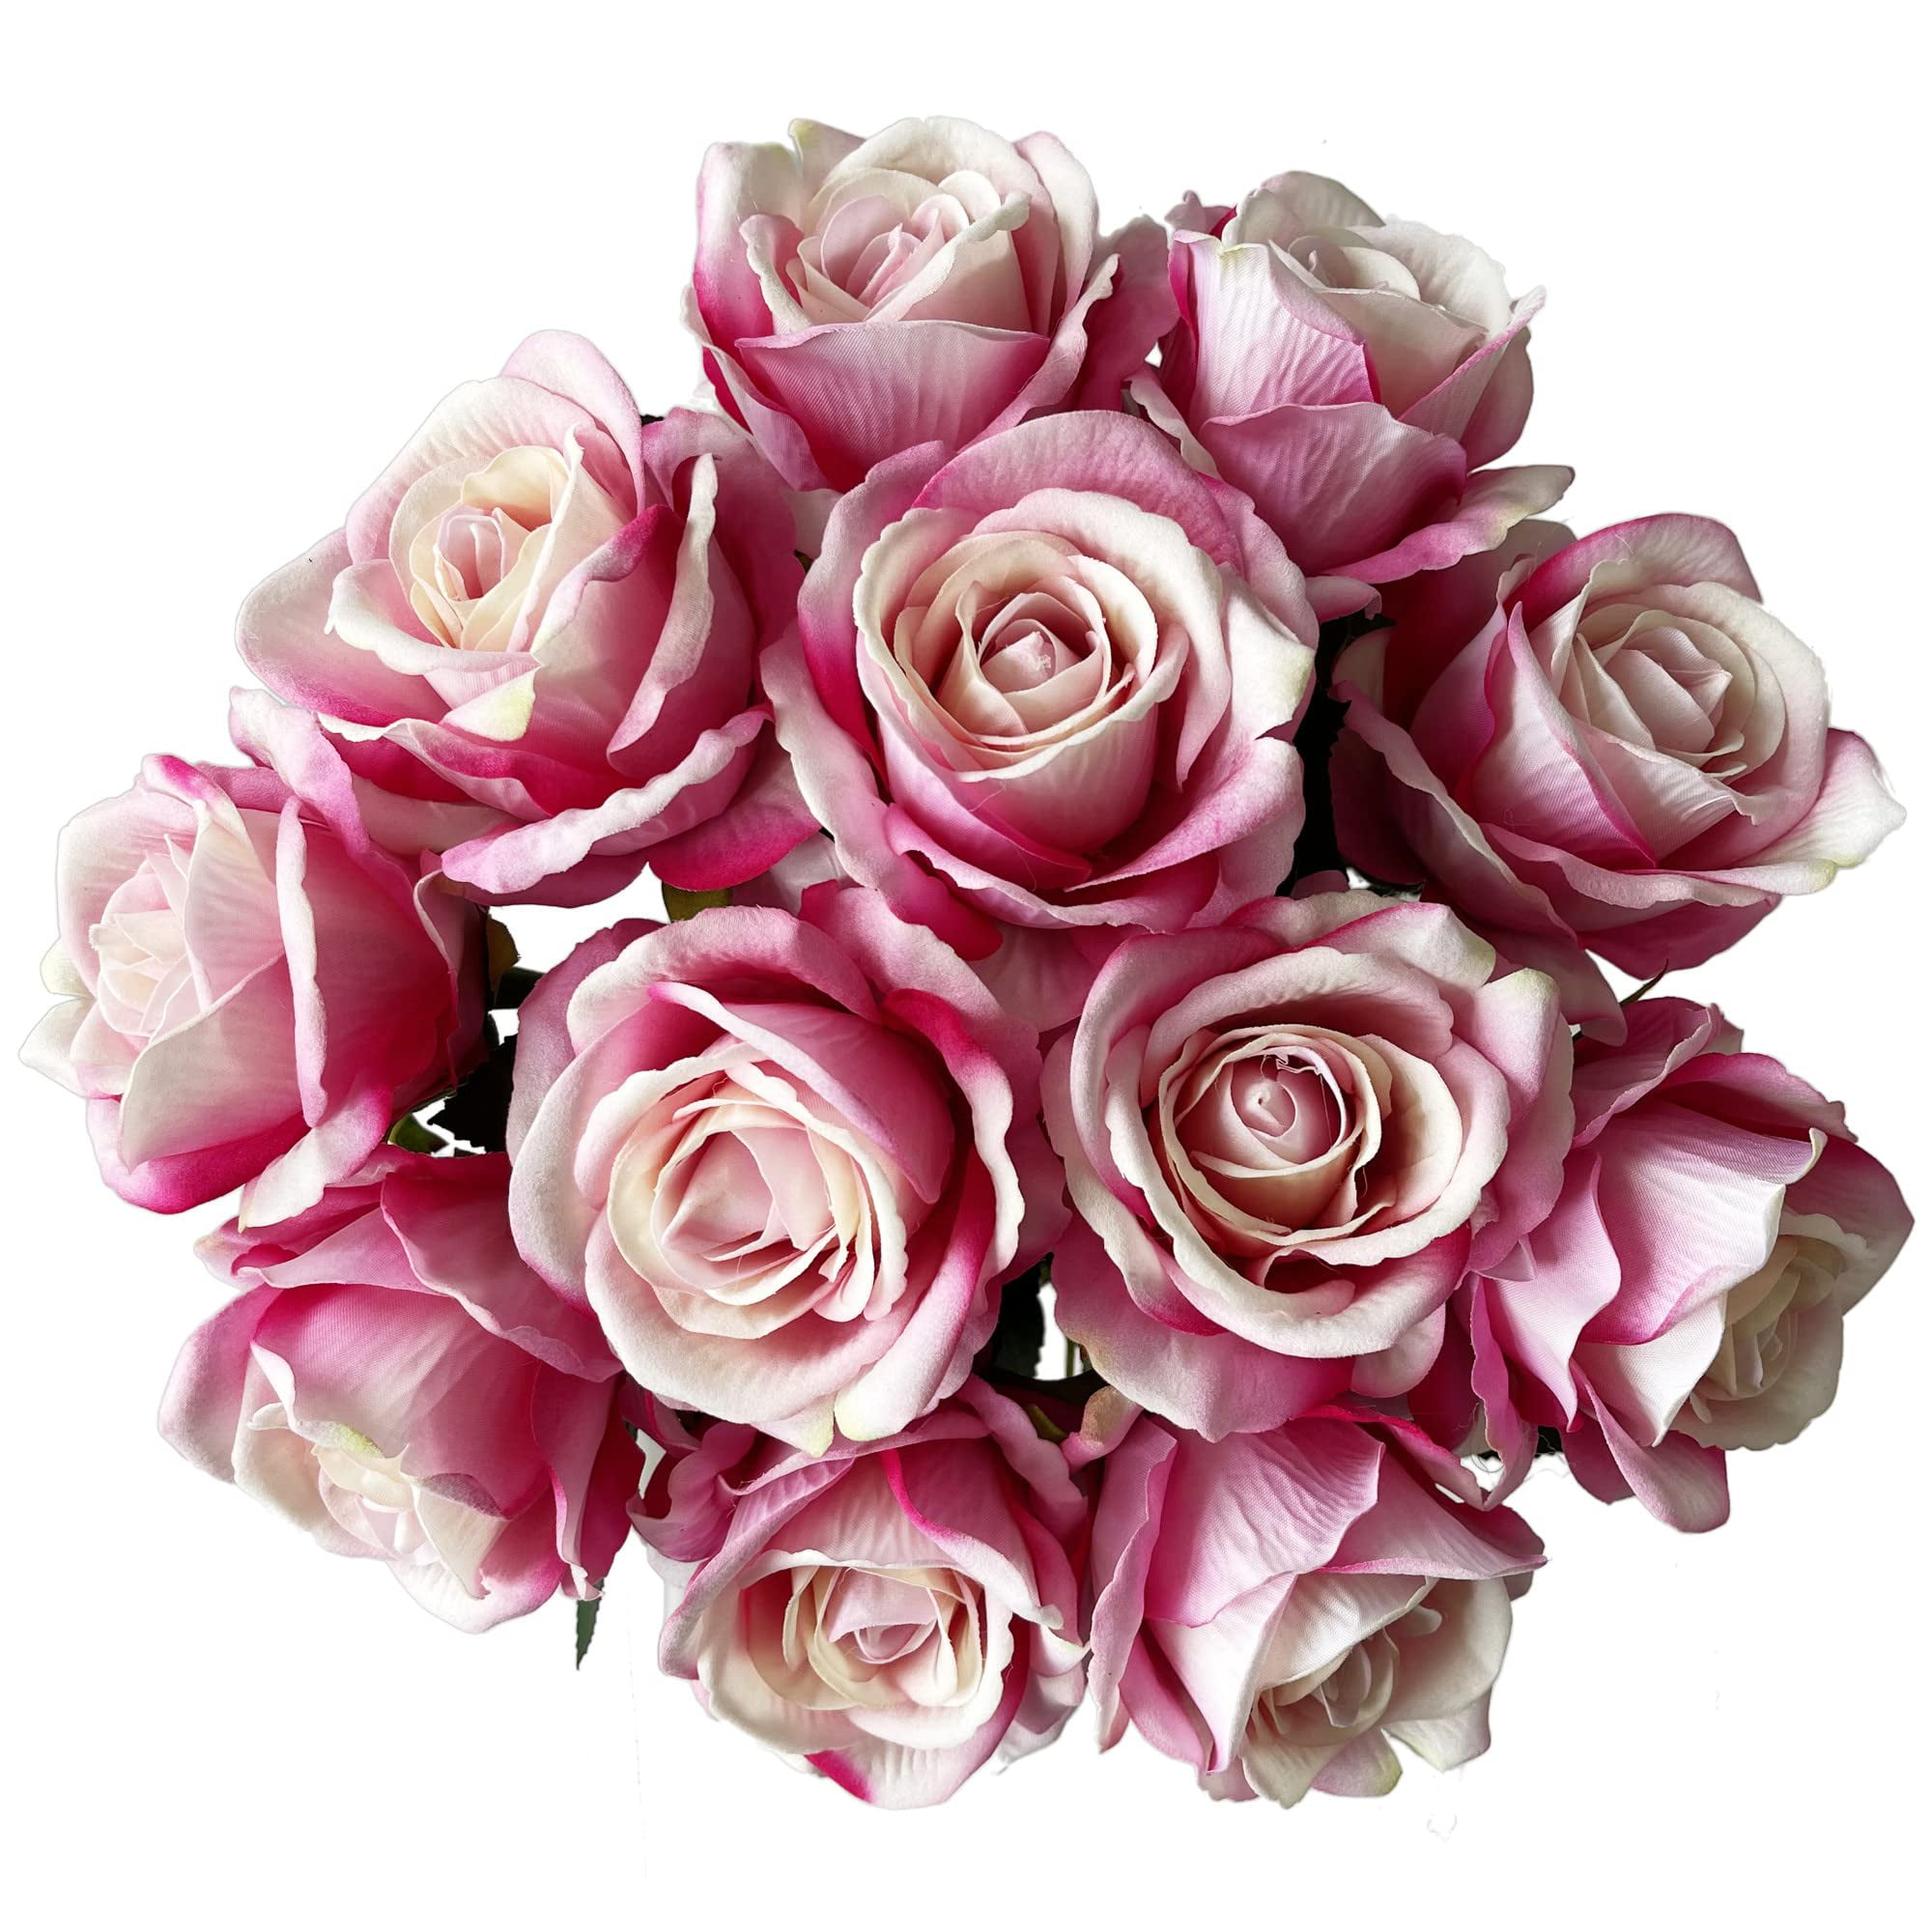 J&S Imports Organza Rose Flower Picks with Pearls (144 Flowers) (Pink)